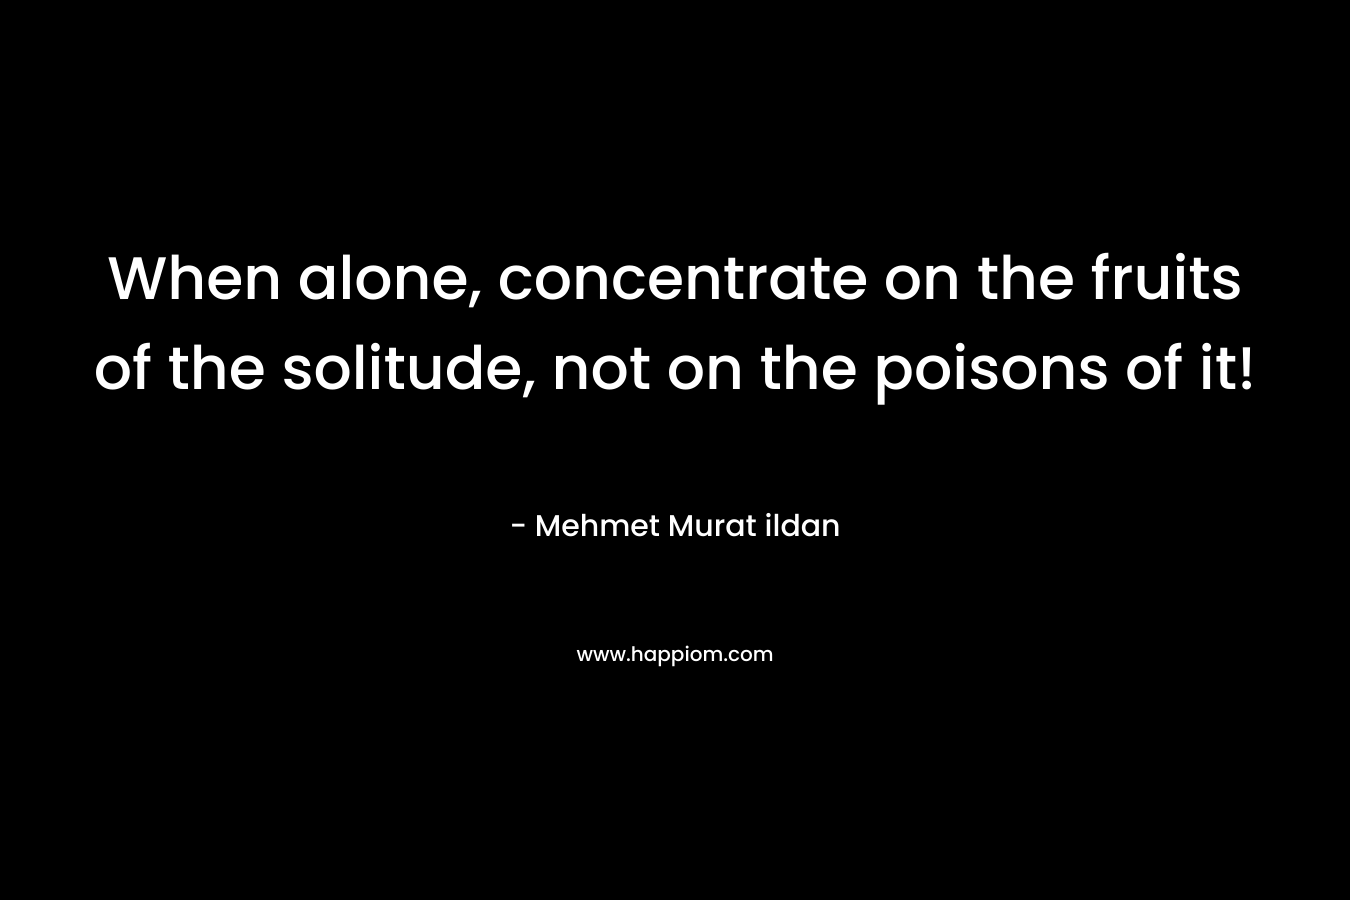 When alone, concentrate on the fruits of the solitude, not on the poisons of it!